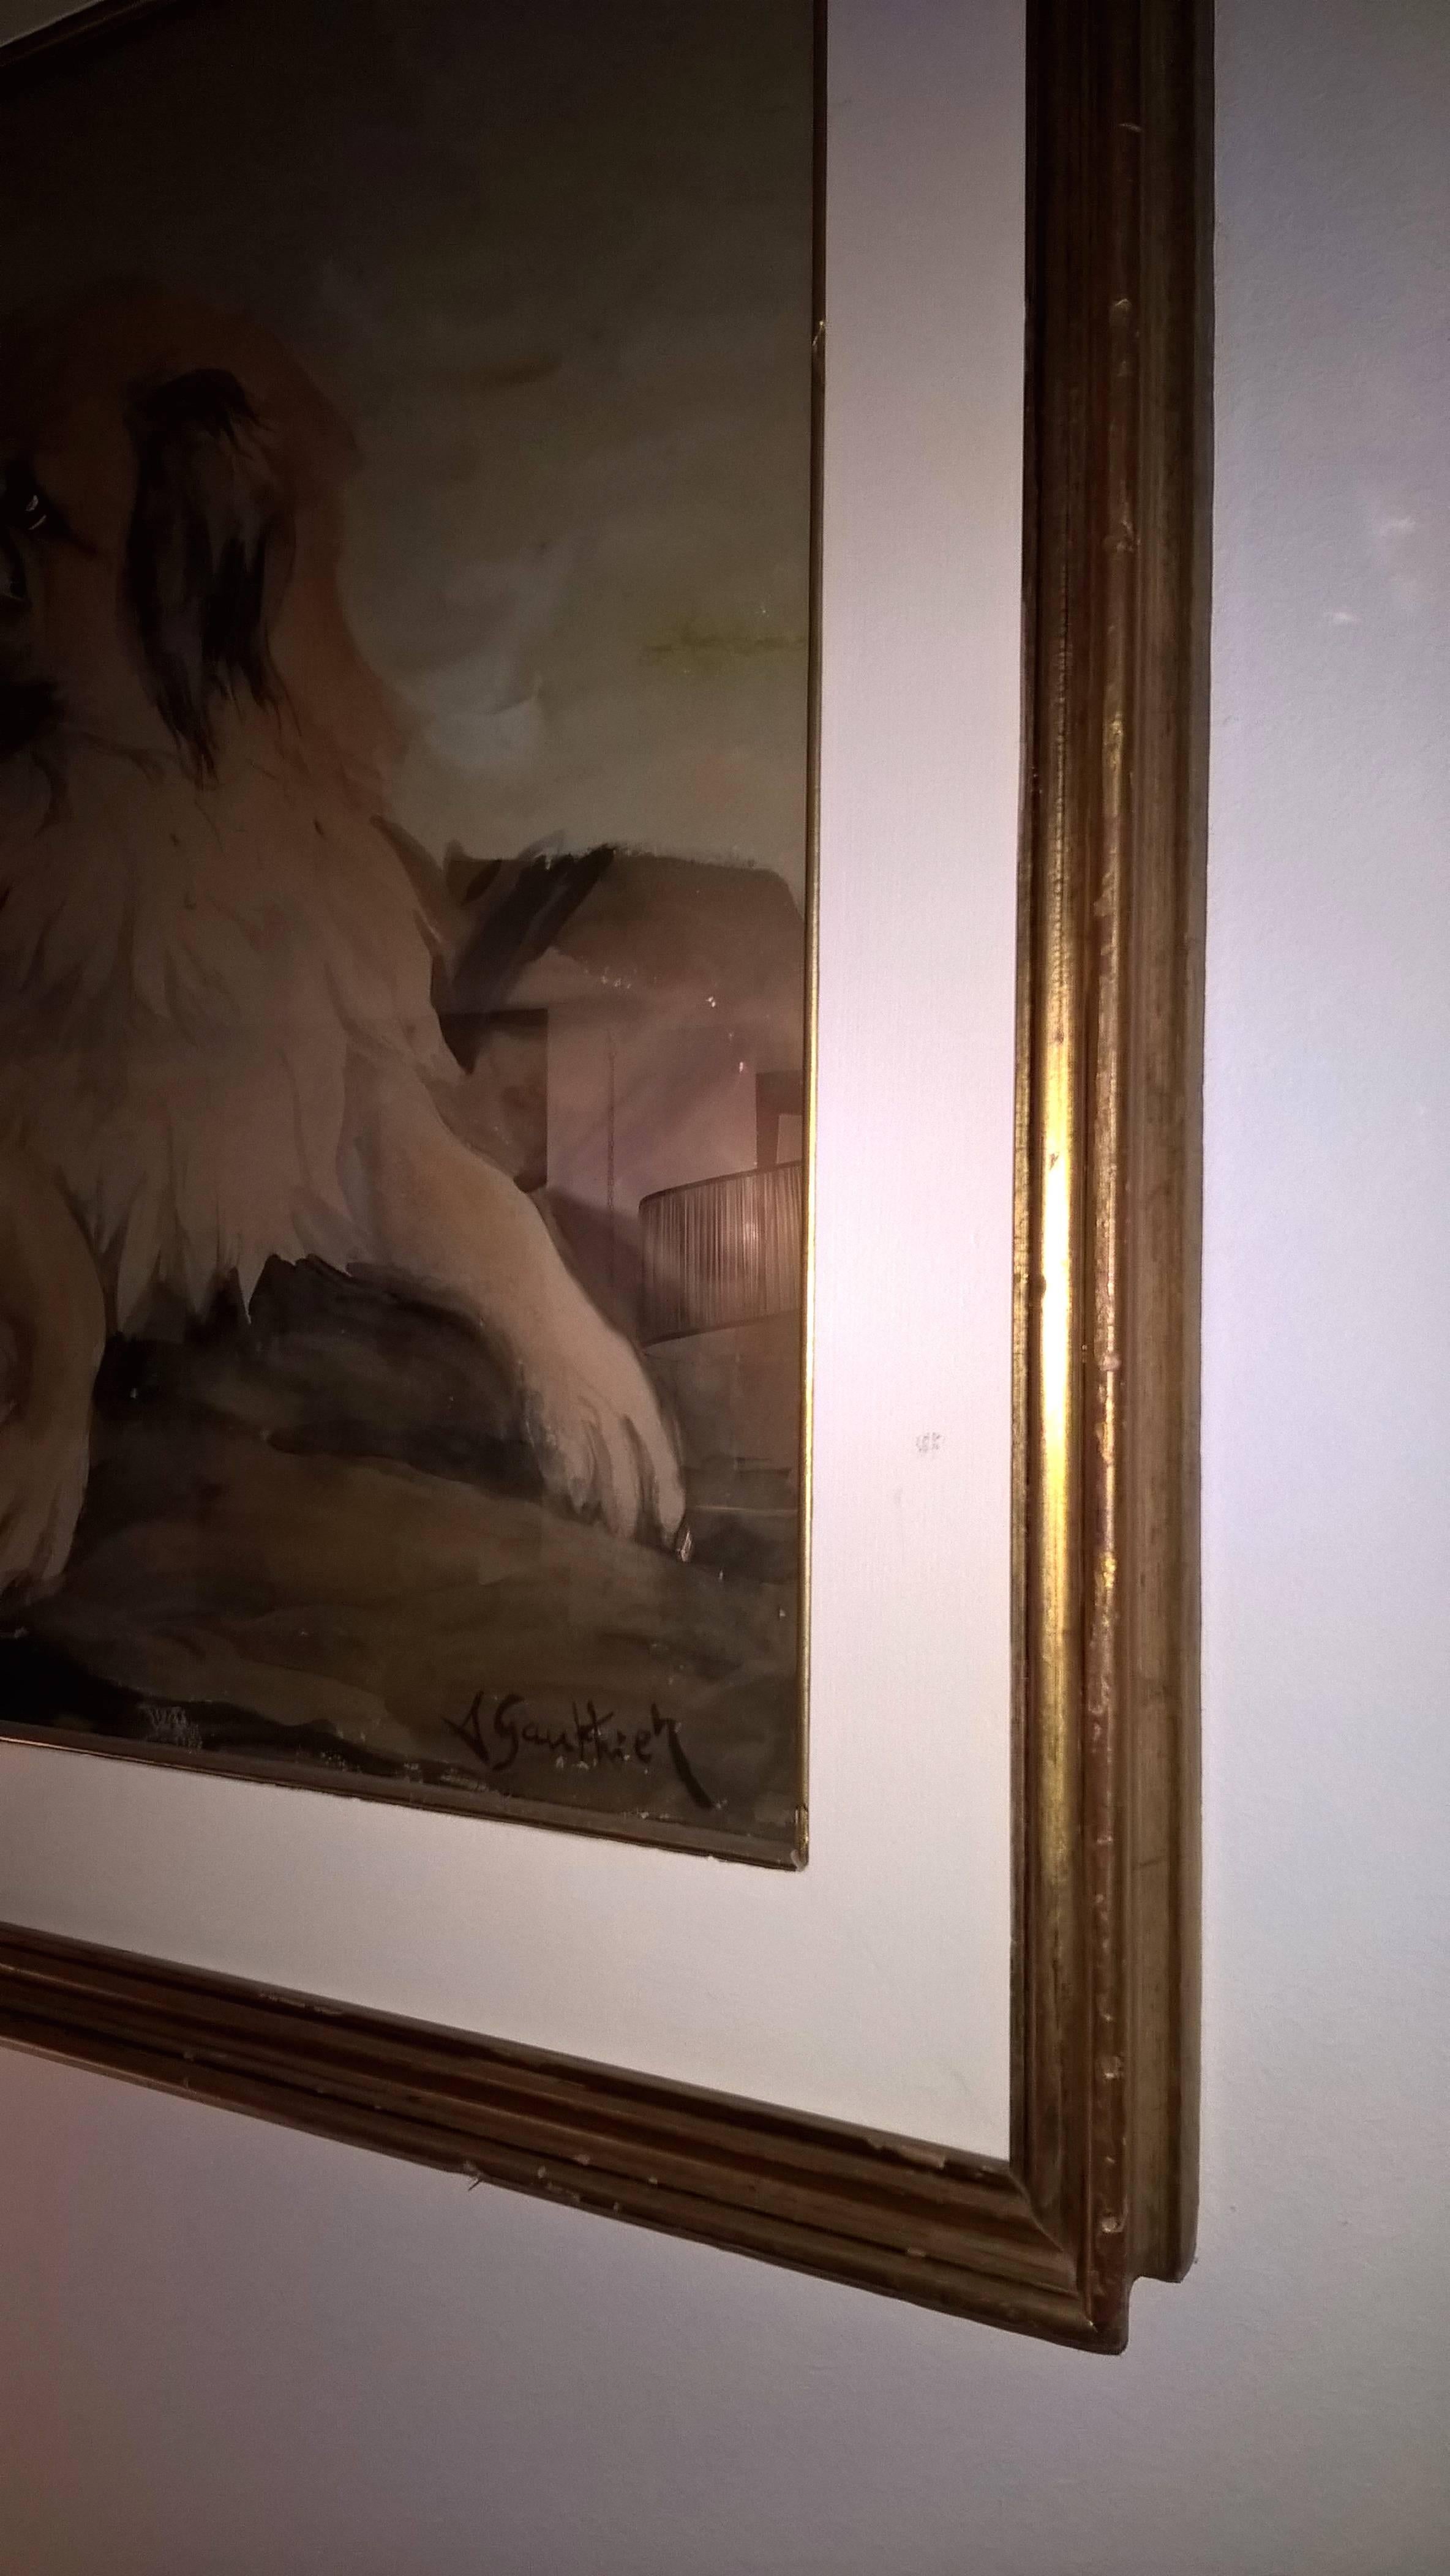 Pine French Dog Painting 20th Century Pekingese Dog Portrait by A Gauthier